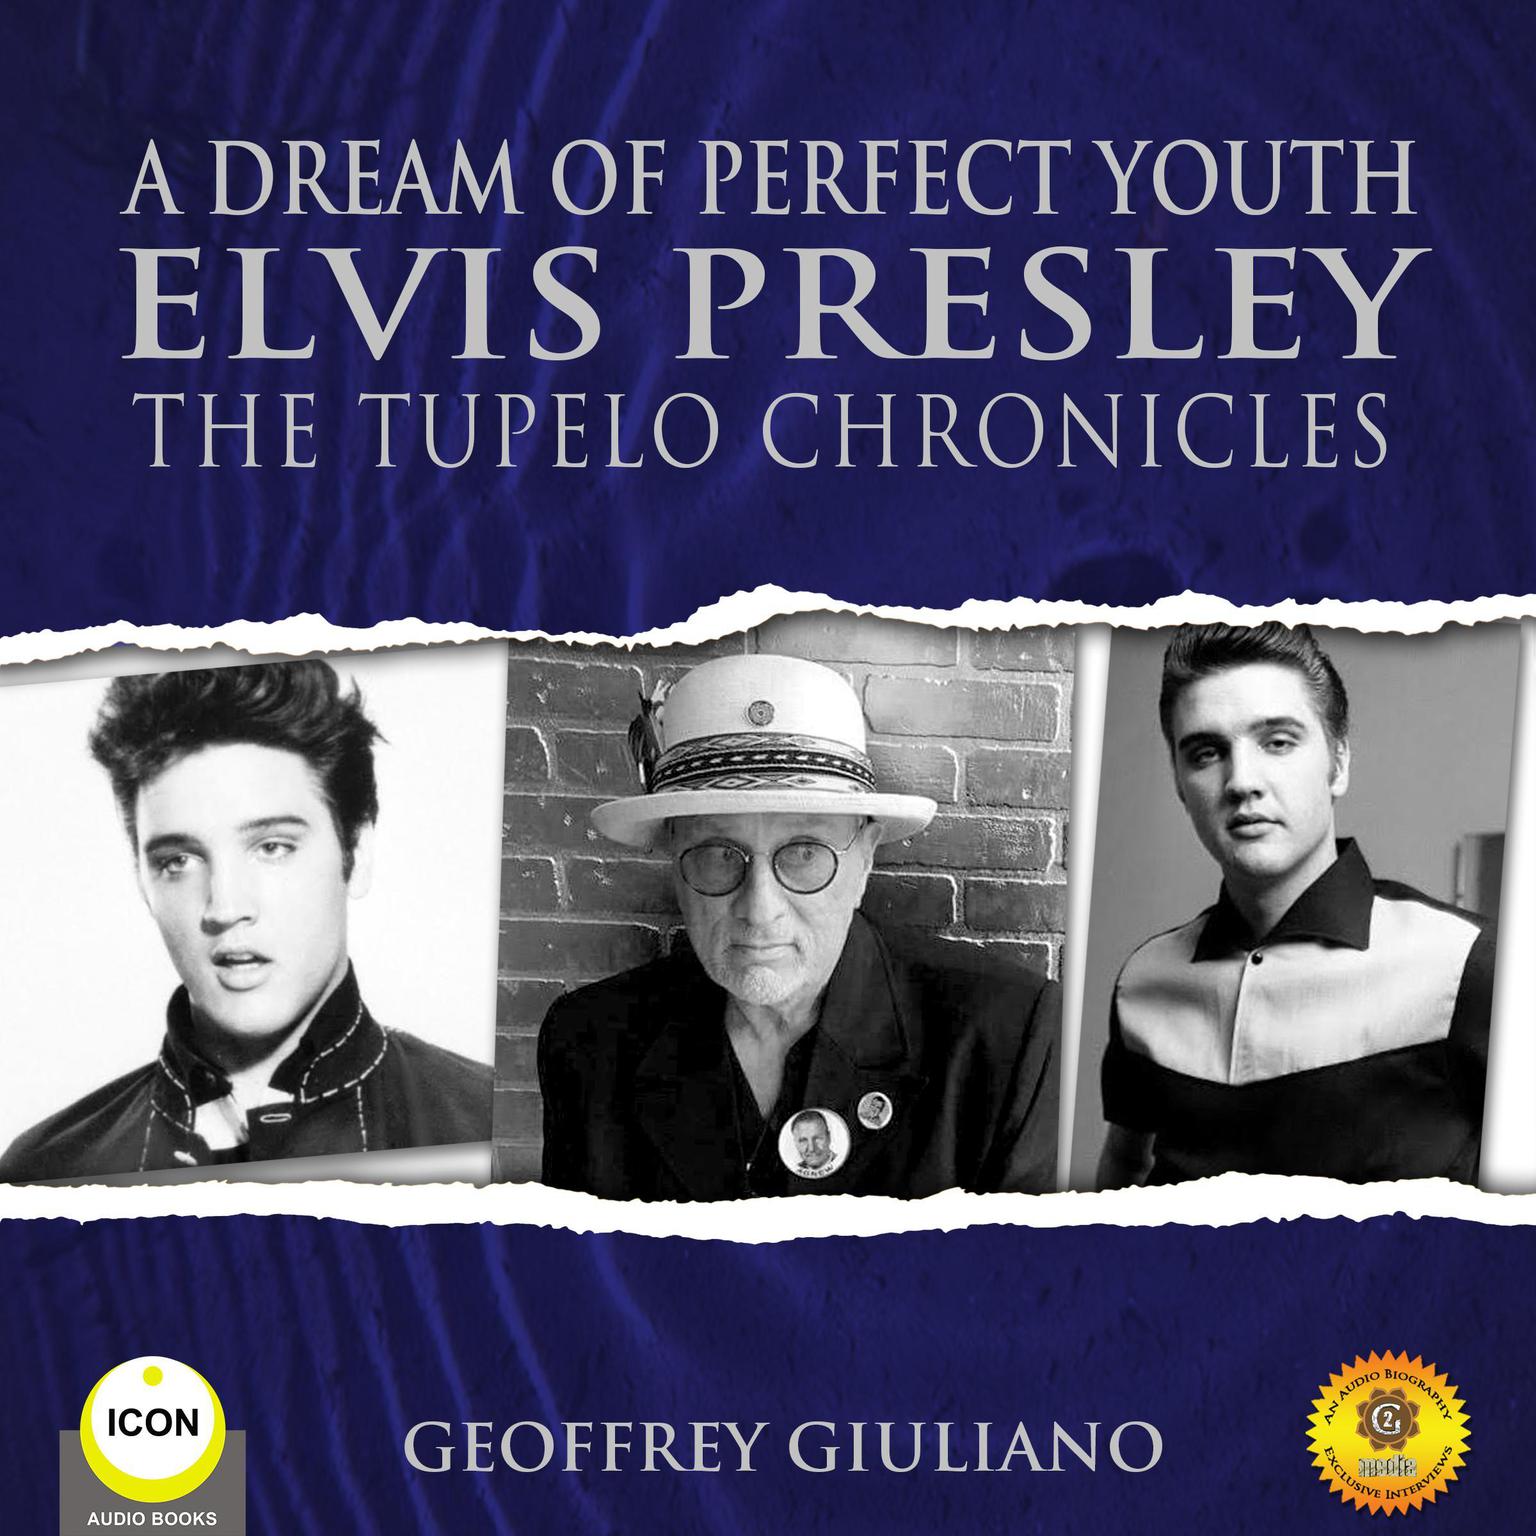 A Dream of Perfect Youth Elvis Presley The Tupelo Chronicles Audiobook, by Geoffrey Giuliano